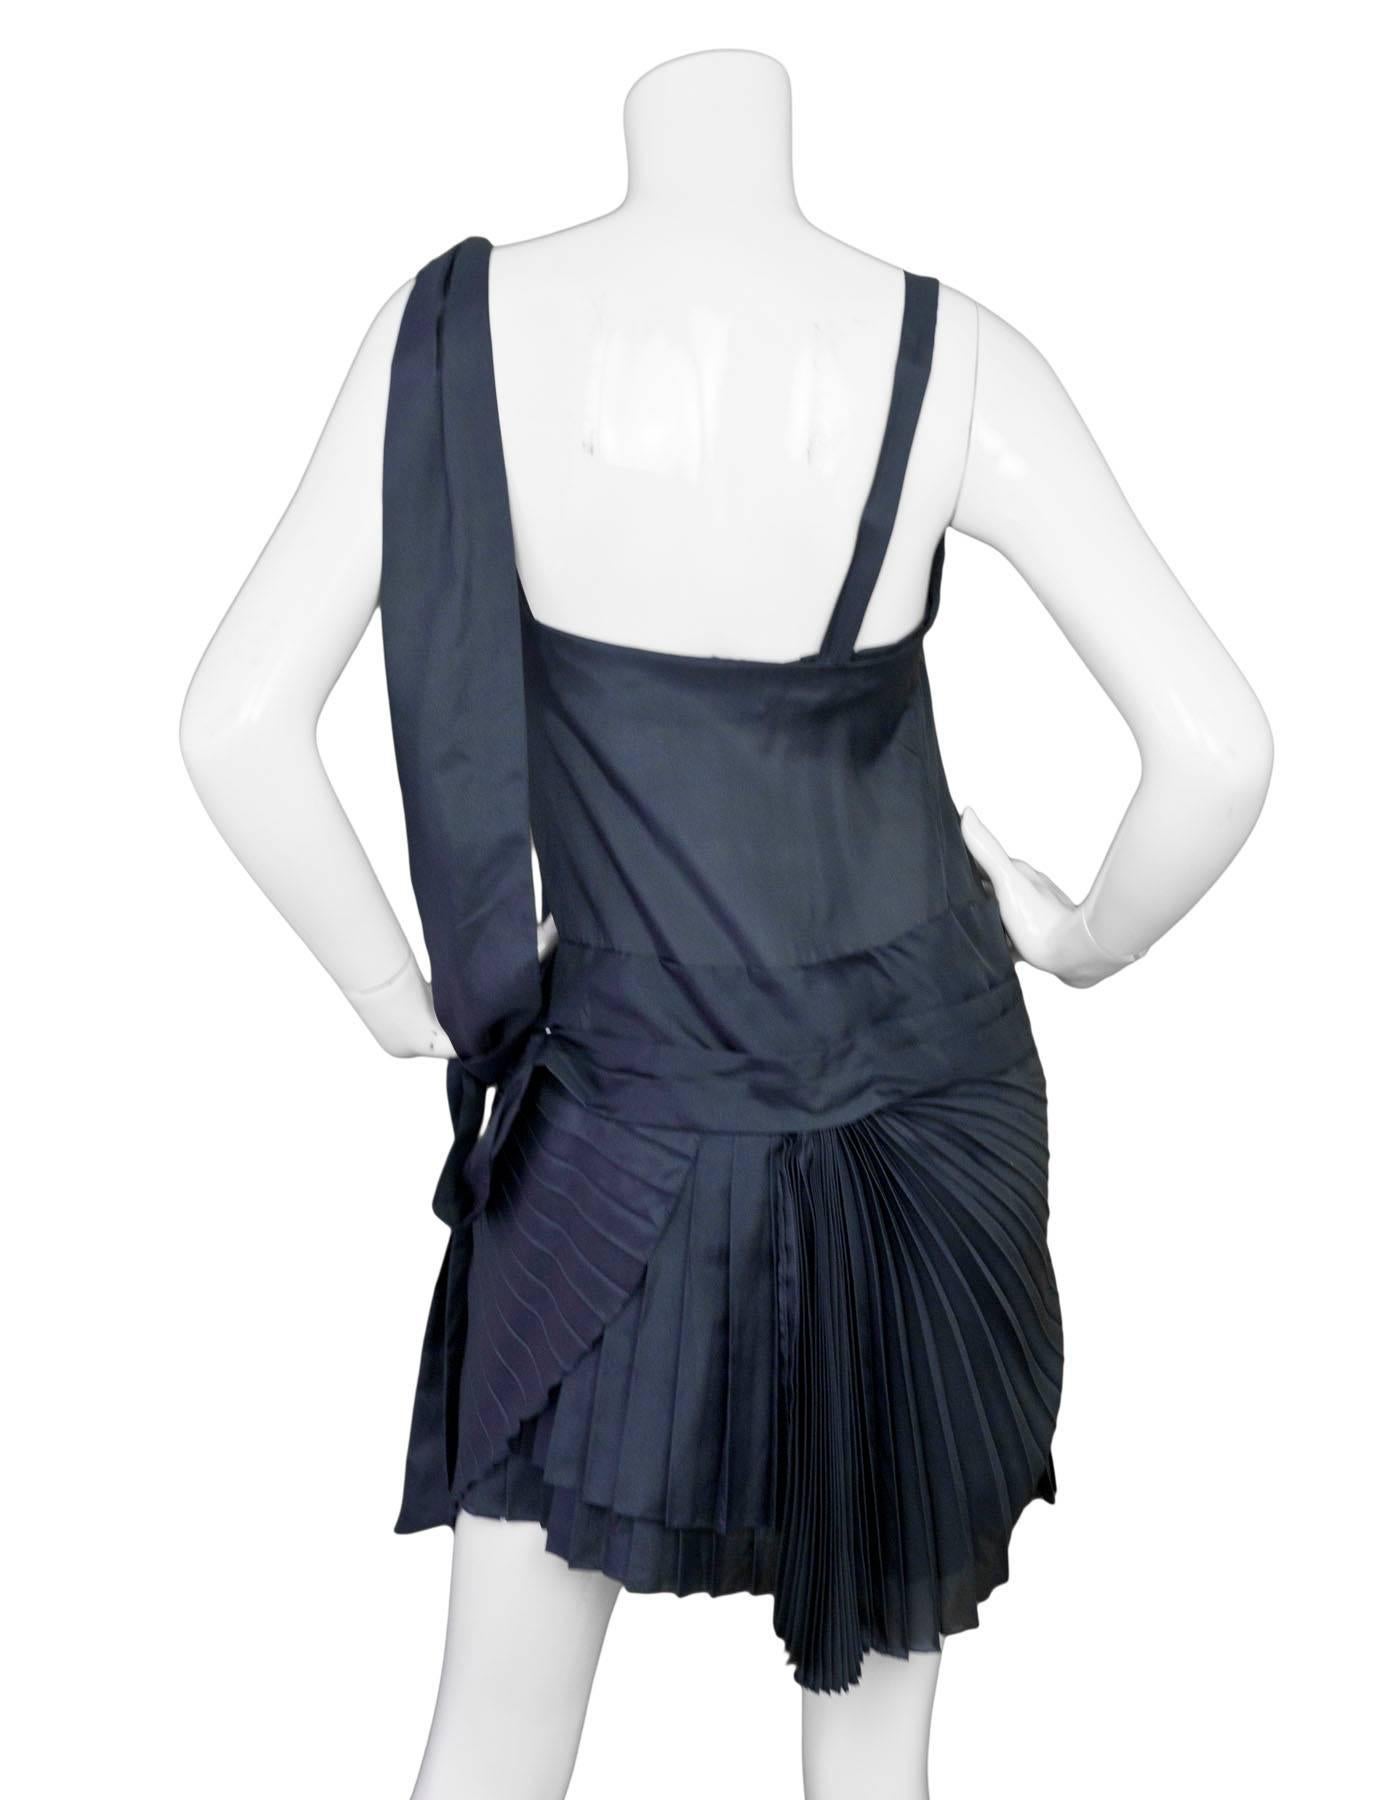 Alexander McQueen Vintage Slate Silk Pleated Ruffle Dress
Features fanned micropleating throughout skirt

Made In: Italy
Color: Blue-Grey Slate
Composition: 100% Silk
Lining: Slate, 100% Silk
Closure/Opening: Side zipper closure
Exterior Pockets: